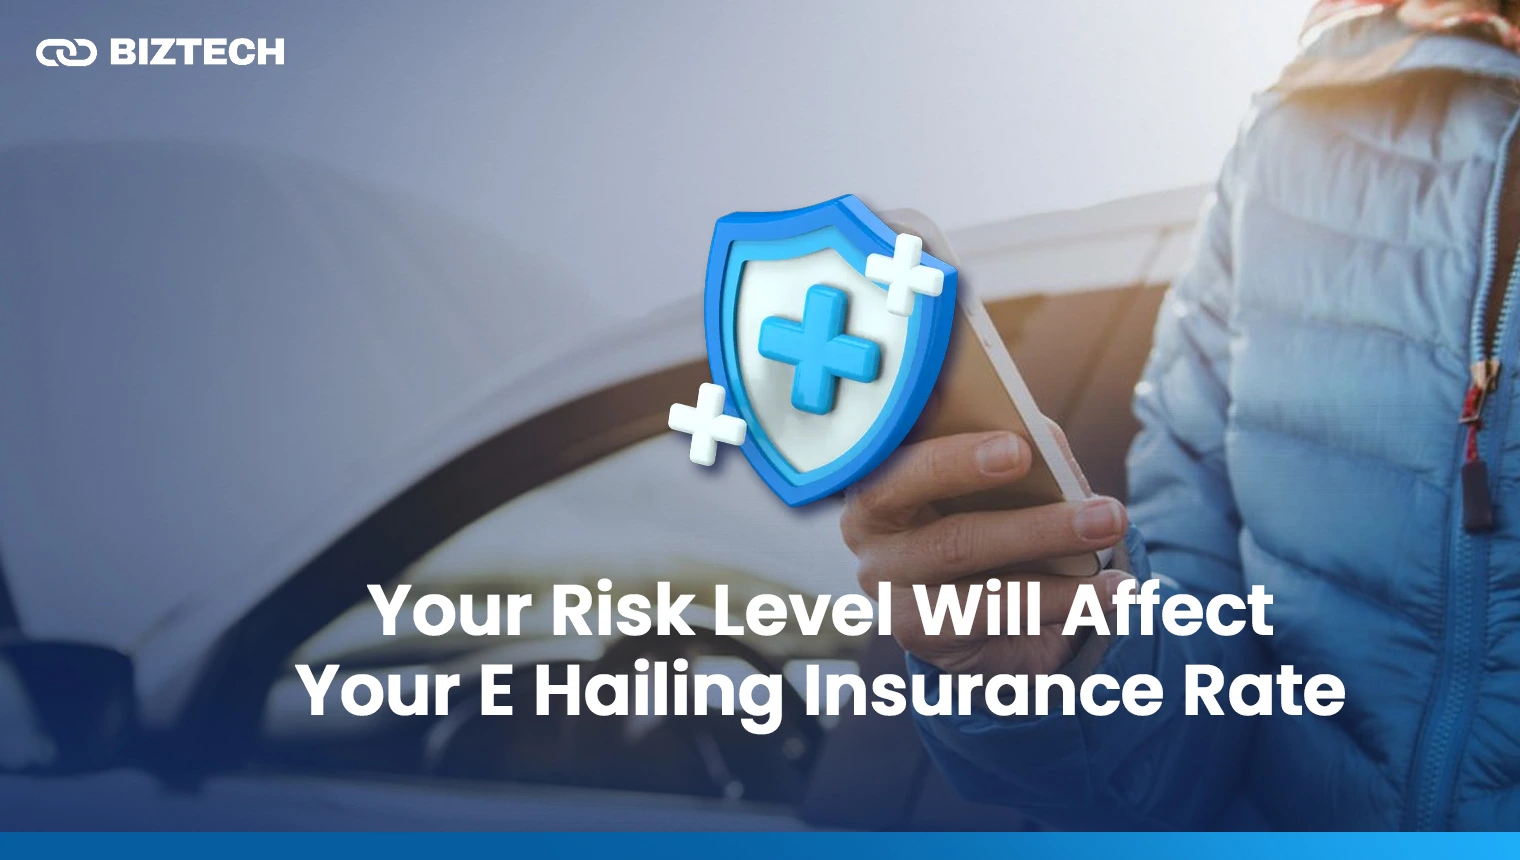 Your Risk Level Will Affect Your E Hailing Insurance Rate